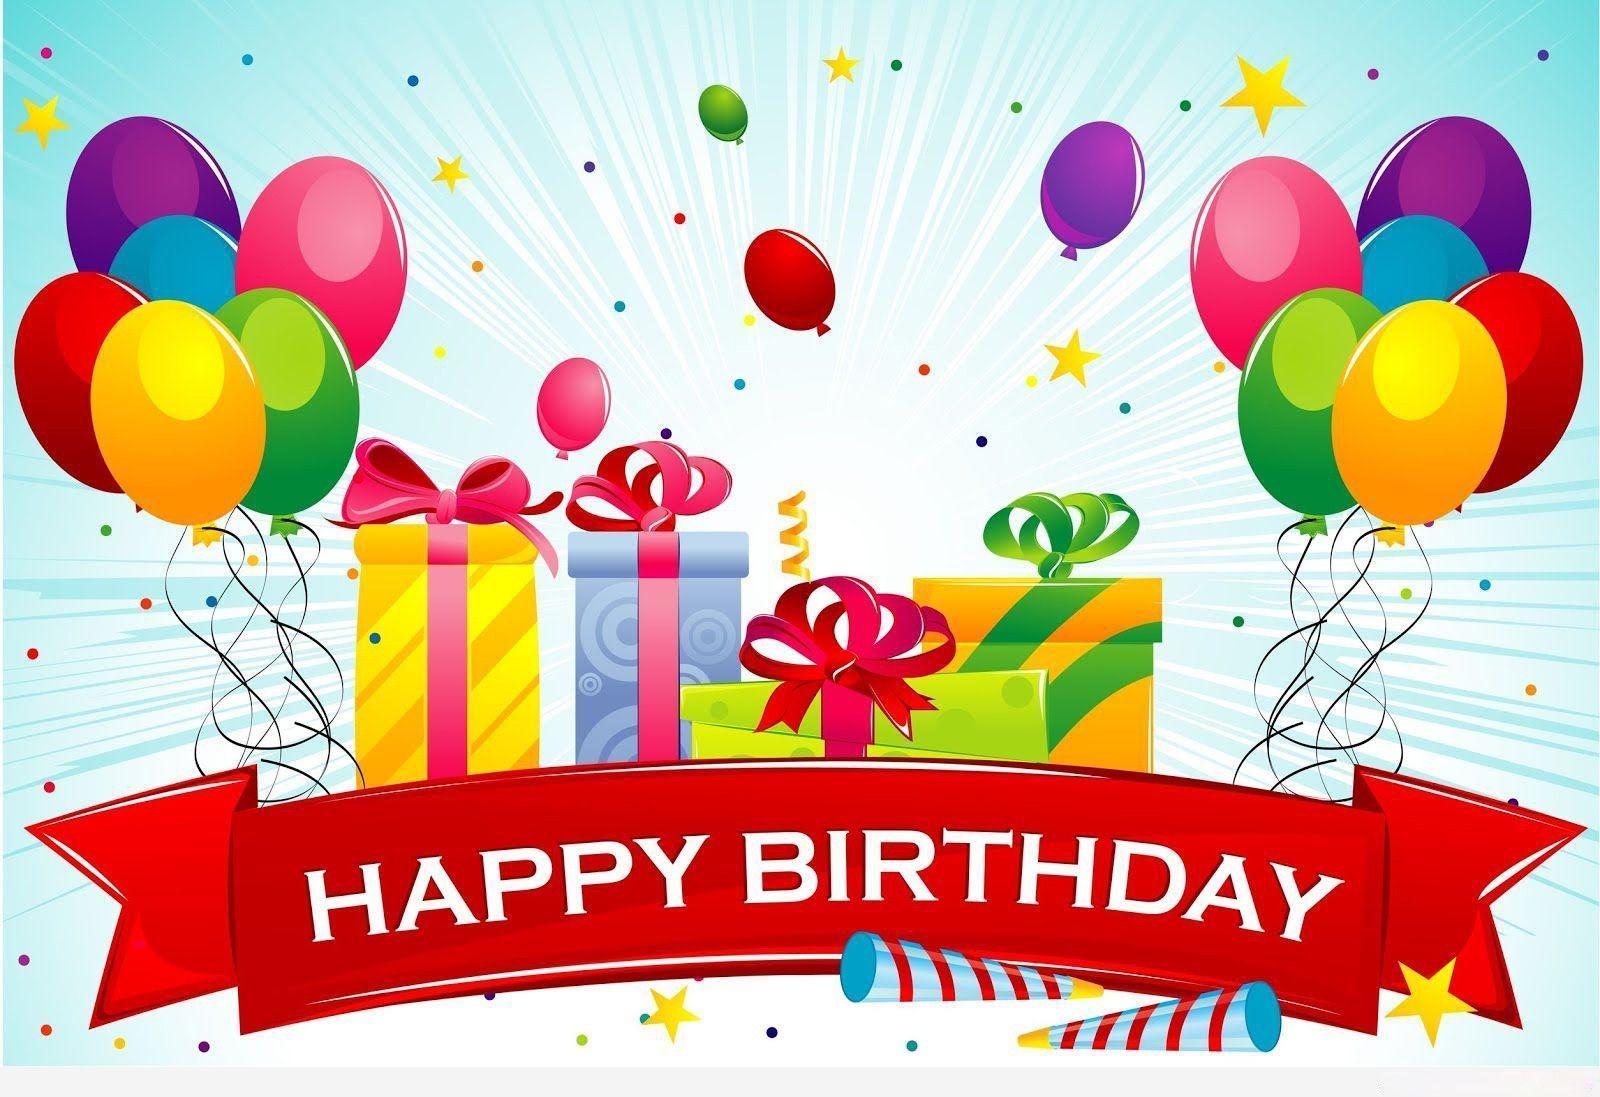 Detail Free Downloadable Happy Birthday Images Nomer 9